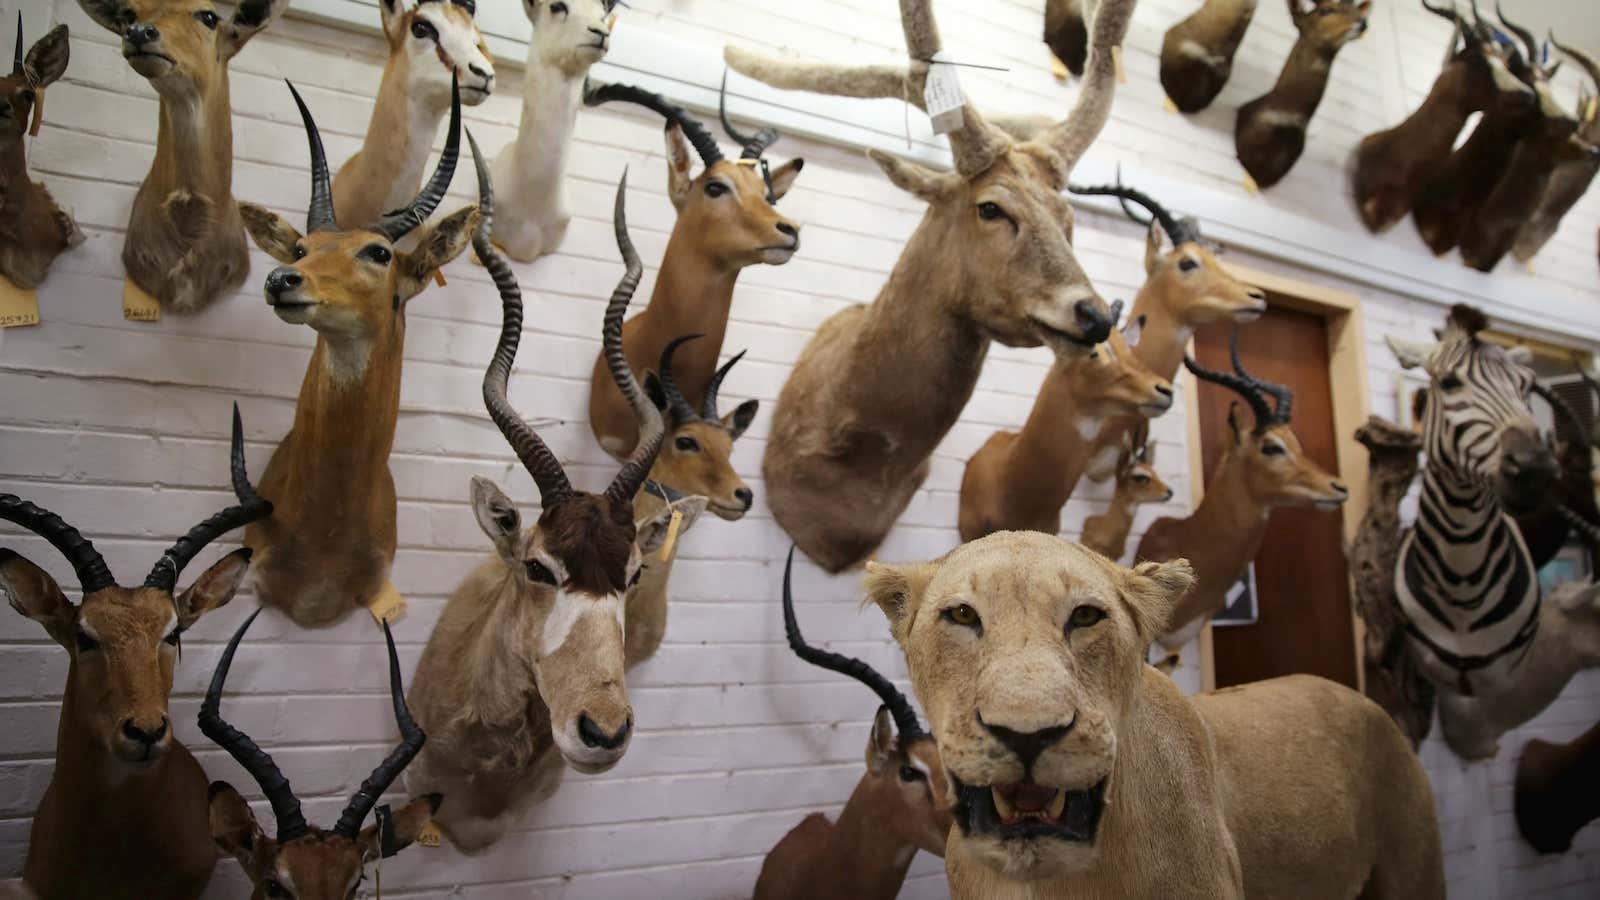 Animal trophies are seen at the entrance of a taxidermy studio in Pretoria, South Africa.